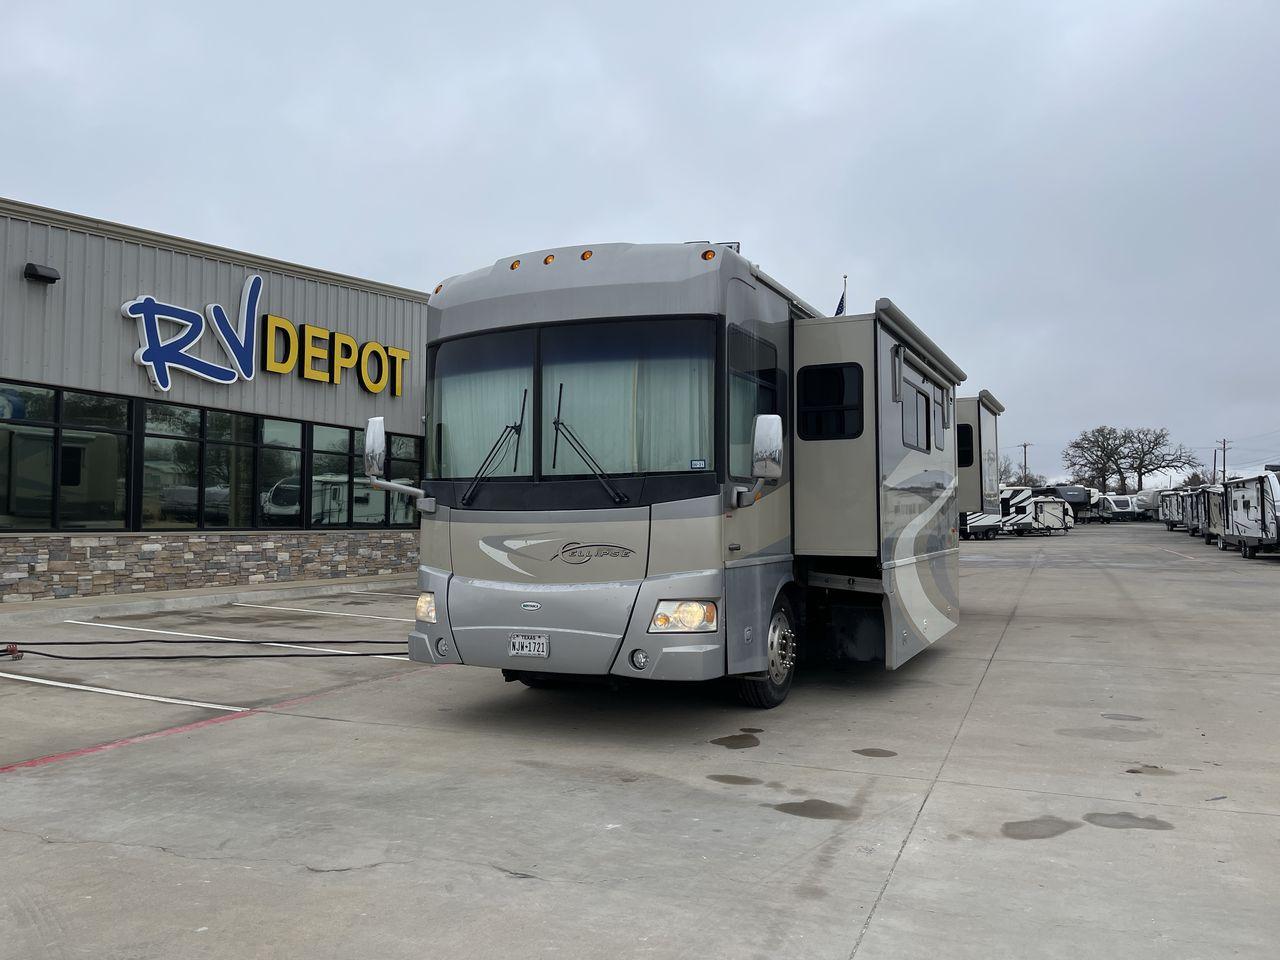 2006 BLUE ITASCA ELLIPSE 40FD - (4UZACKDC56C) , Length: 39 ft | Dry Weight: 32000 lbs | Gross Weight: 42000 lbs transmission, located at 4319 N Main Street, Cleburne, TX, 76033, (817) 221-0660, 32.435829, -97.384178 - Here is the 2006 Itasca Ellipse 40FD, a top-of-the-line Class A motorhome designed for road trippers who want the ultimate in comfort and style. It is 39 feet long and weighs 32,000 pounds dry. The inside is very roomy and comfortable, making it perfect for long trips. The gross weight of this RV is - Photo #0